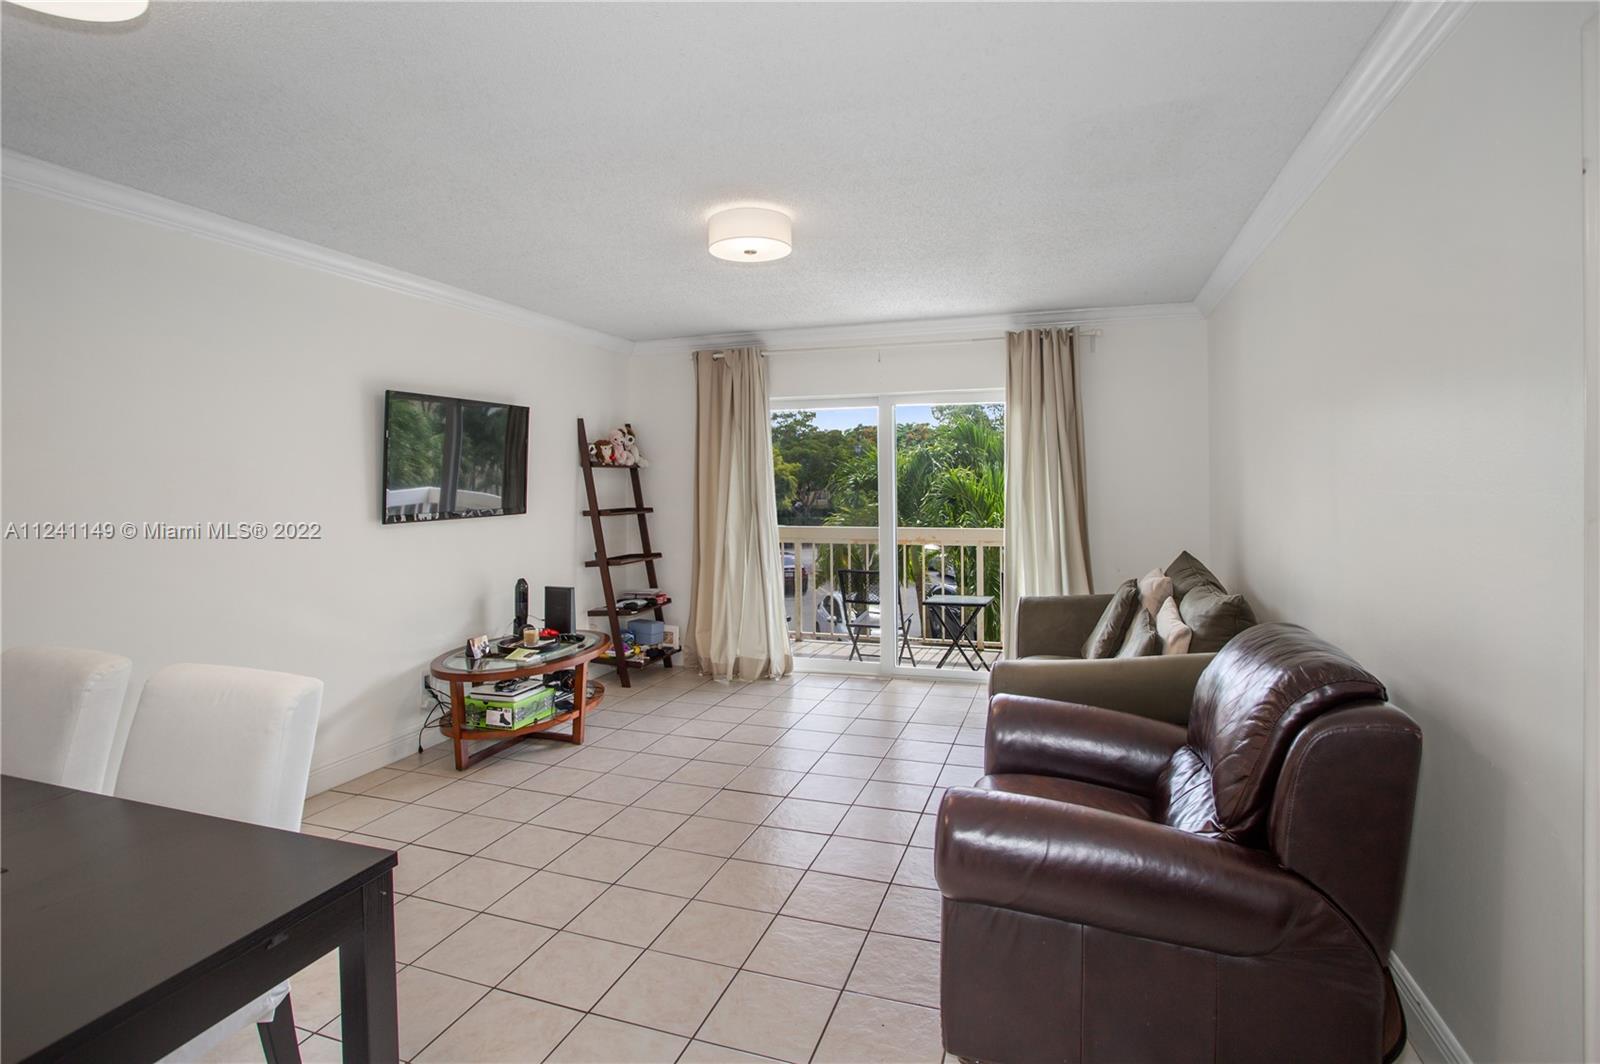 Amazing opportunity to own a 1/1 condo in the centrally located Village of Kings Creek! the community includes several amenities such as a pool, tennis and basketball court, gym, children play area, 24/7 security patrol etc. This unit is directly in front of the laundry facility on the second floor. Highly desired location near Dadeland Mall, Metrorail, Palmetto Expressway as well as many stores and restaurants! Do not miss this opportunity!